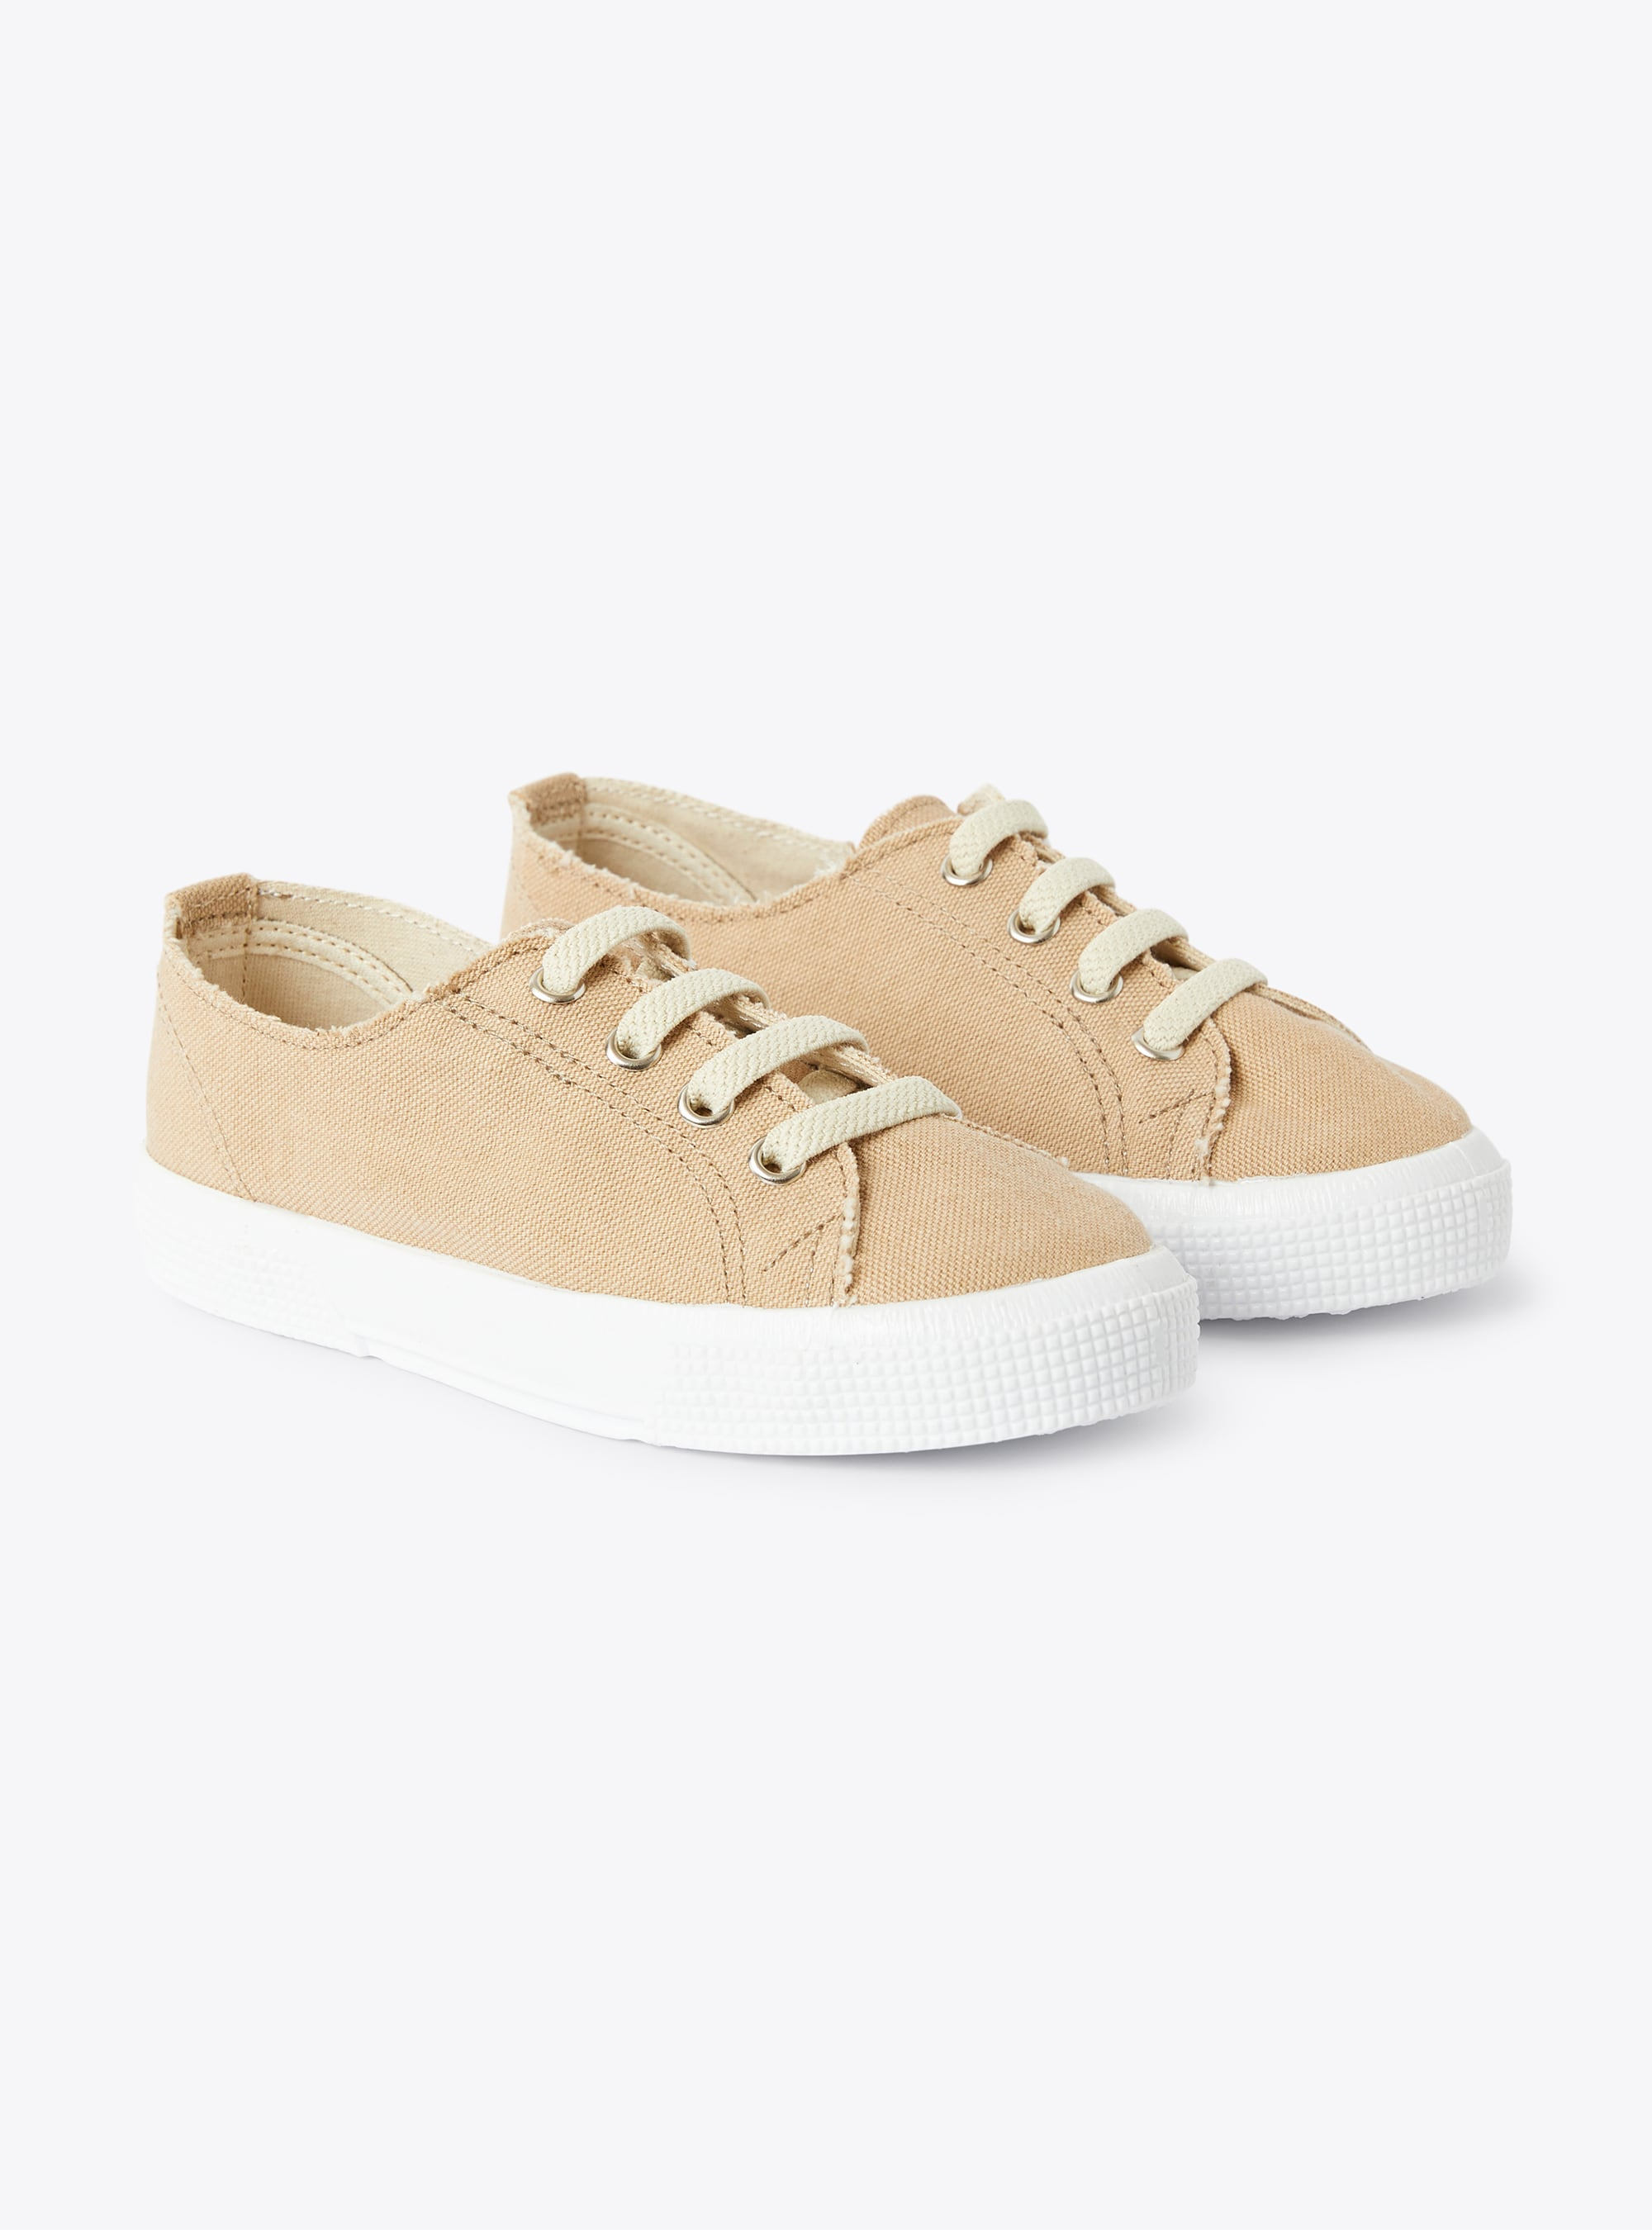 Sneakers in oatmeal-hued canvas - Brown | Il Gufo